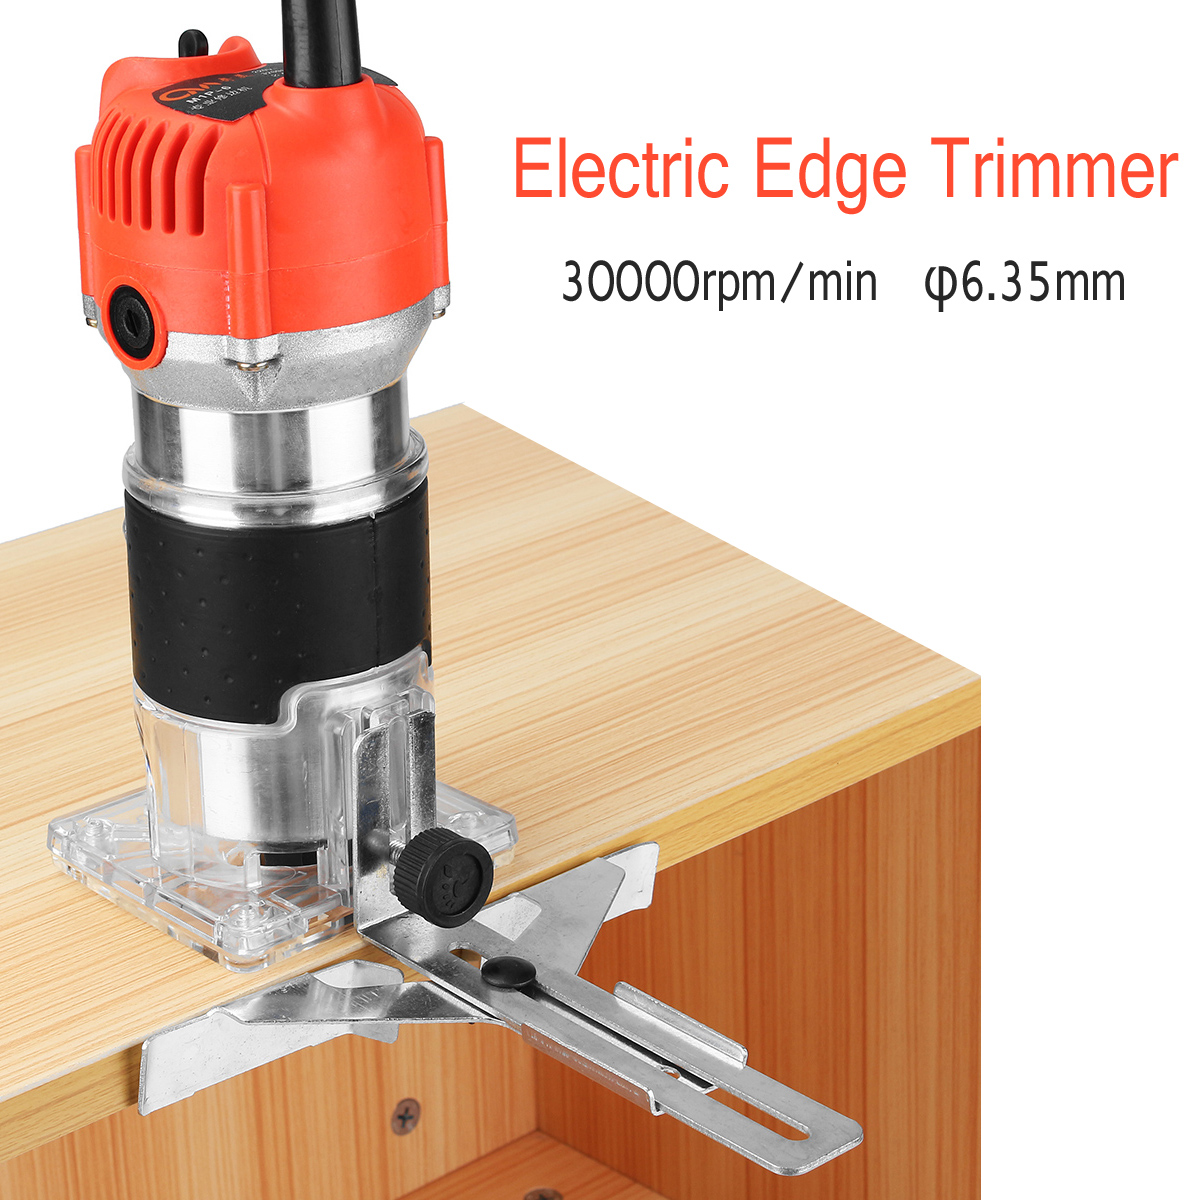 Raitooltrade-220V-680W-30000RPM-Wood-Corded-Electric-Hand-Trimmer-DIY-Tool-Router-635MM-1270211-8